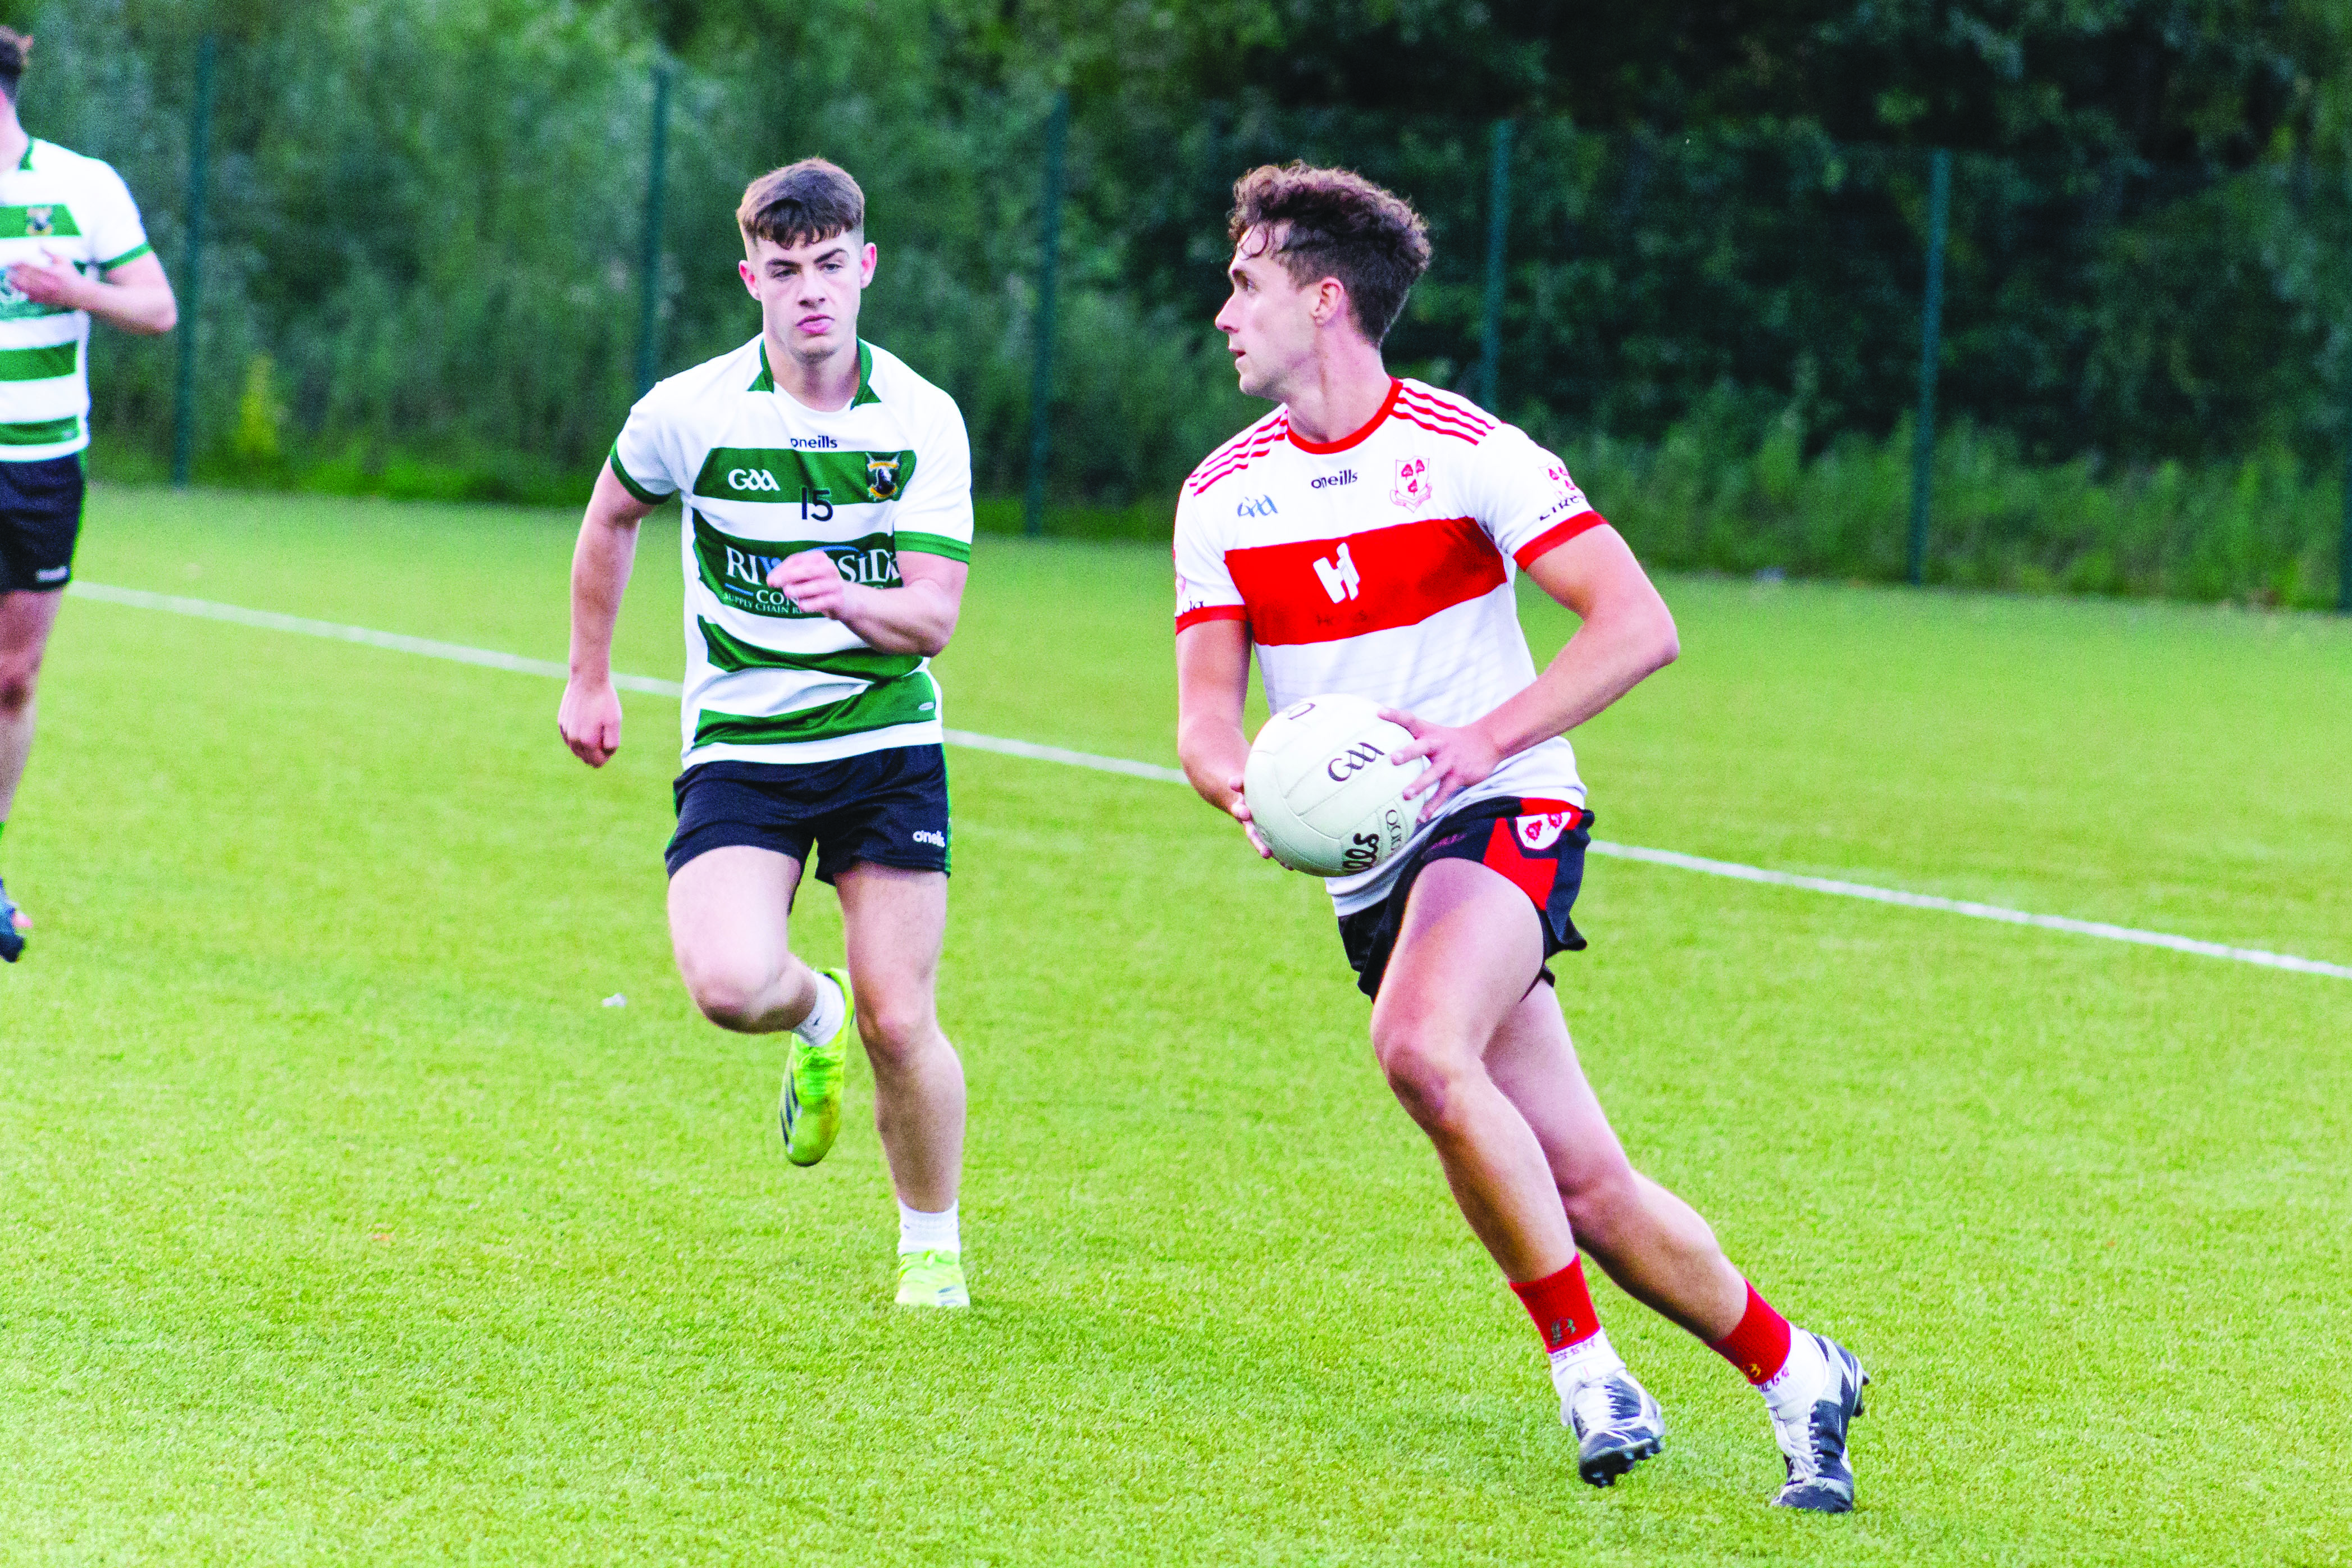 Éire Óg advanced thanks to victory over Wolfe Tones but will head to Colaiste Feirste on Saturday (3pm) to meet an ever-improving Laochra Loch Lao